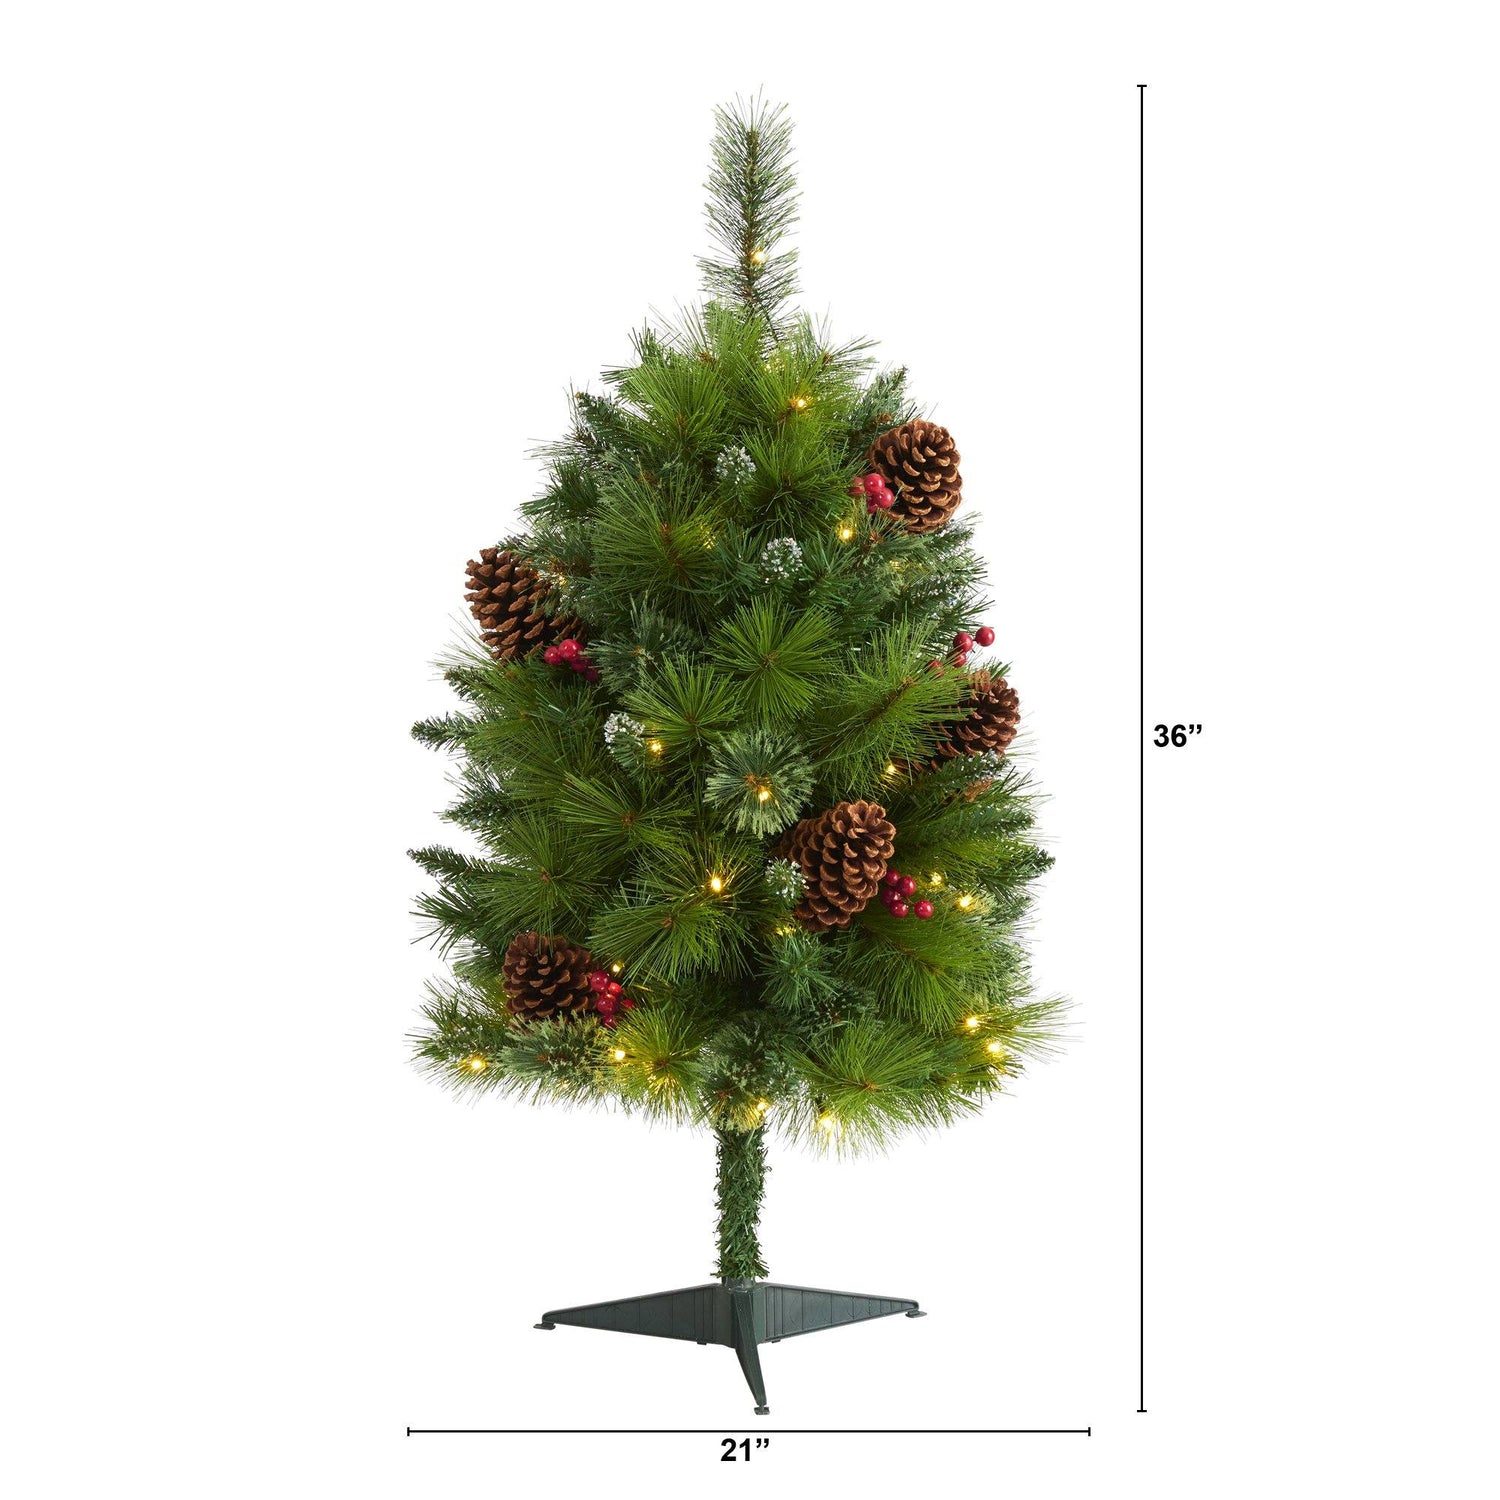 3’ Montana Mixed Pine Artificial Christmas Tree with Pine Cones, Berries and 50 Clear LED Lights